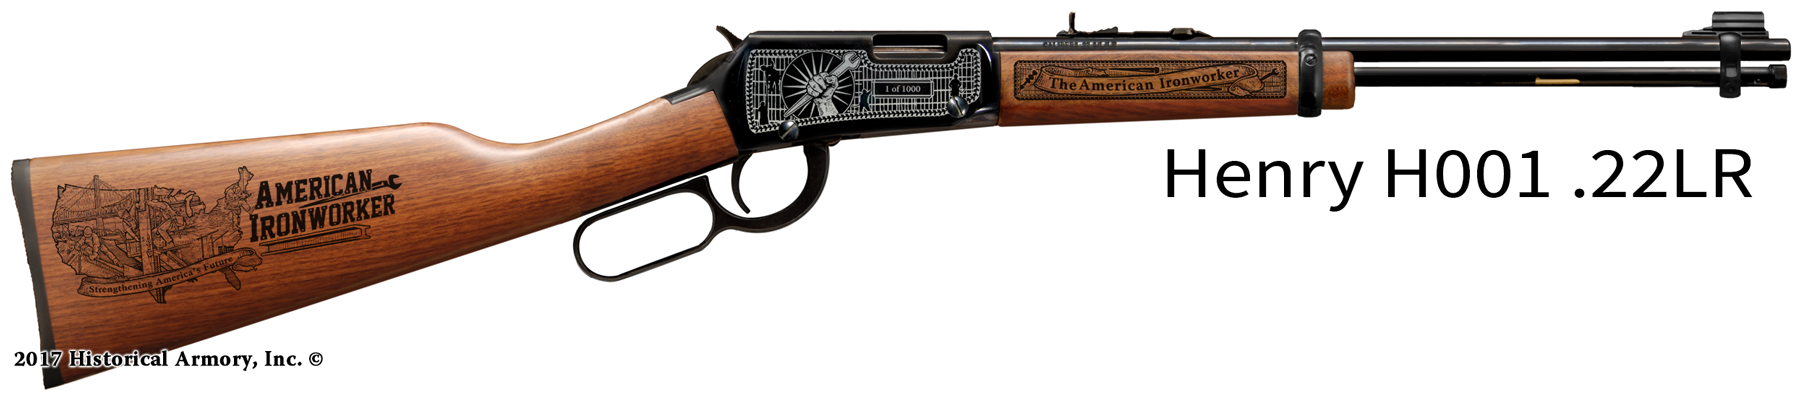 American Ironworker Engraved Henry Rifle